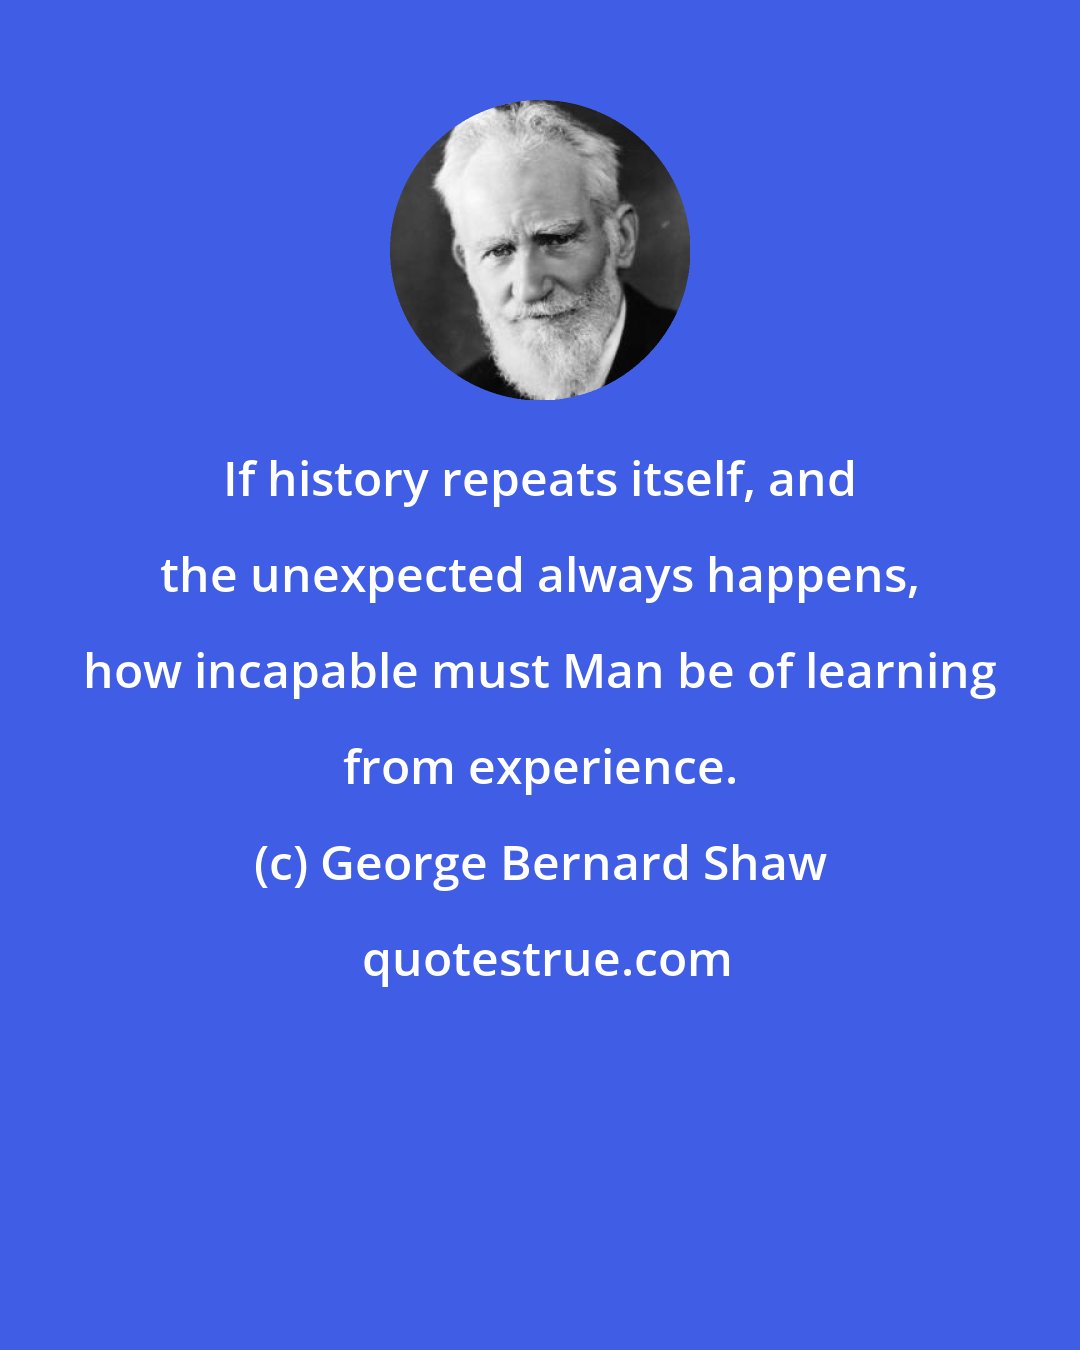 George Bernard Shaw: If history repeats itself, and the unexpected always happens, how incapable must Man be of learning from experience.